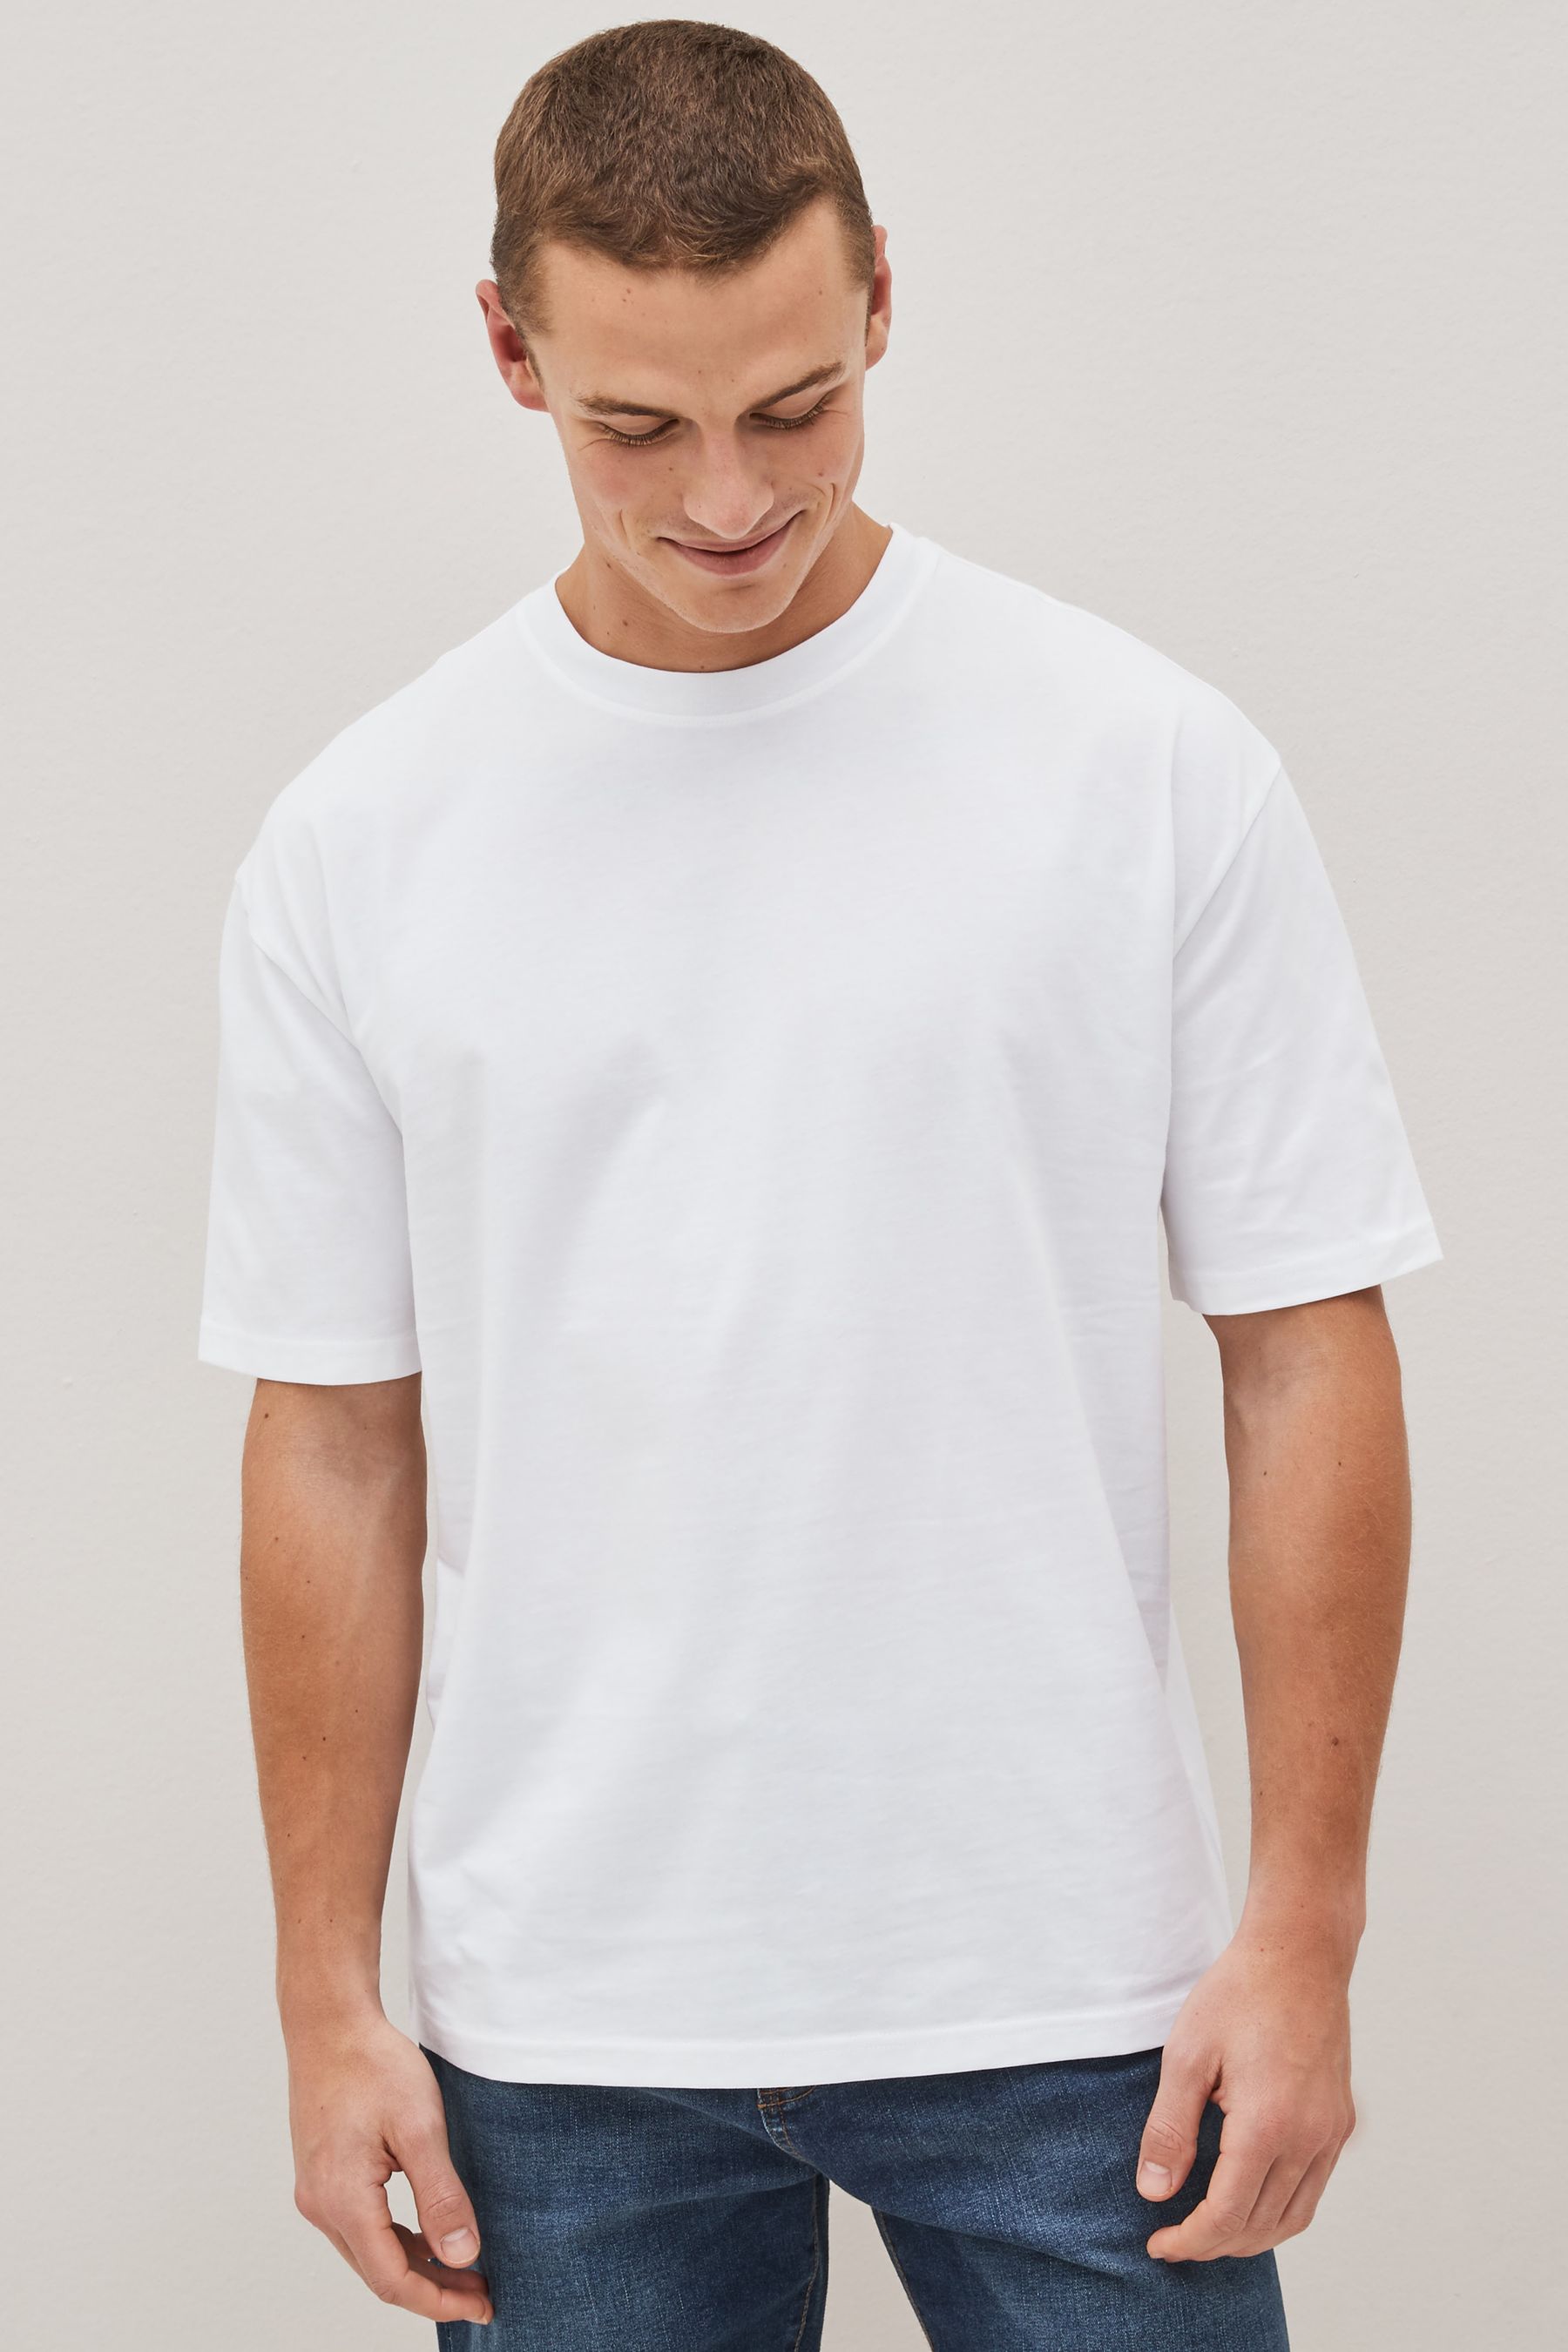 Buy White Relaxed Essential Crew Neck T-Shirt from the Next UK online shop